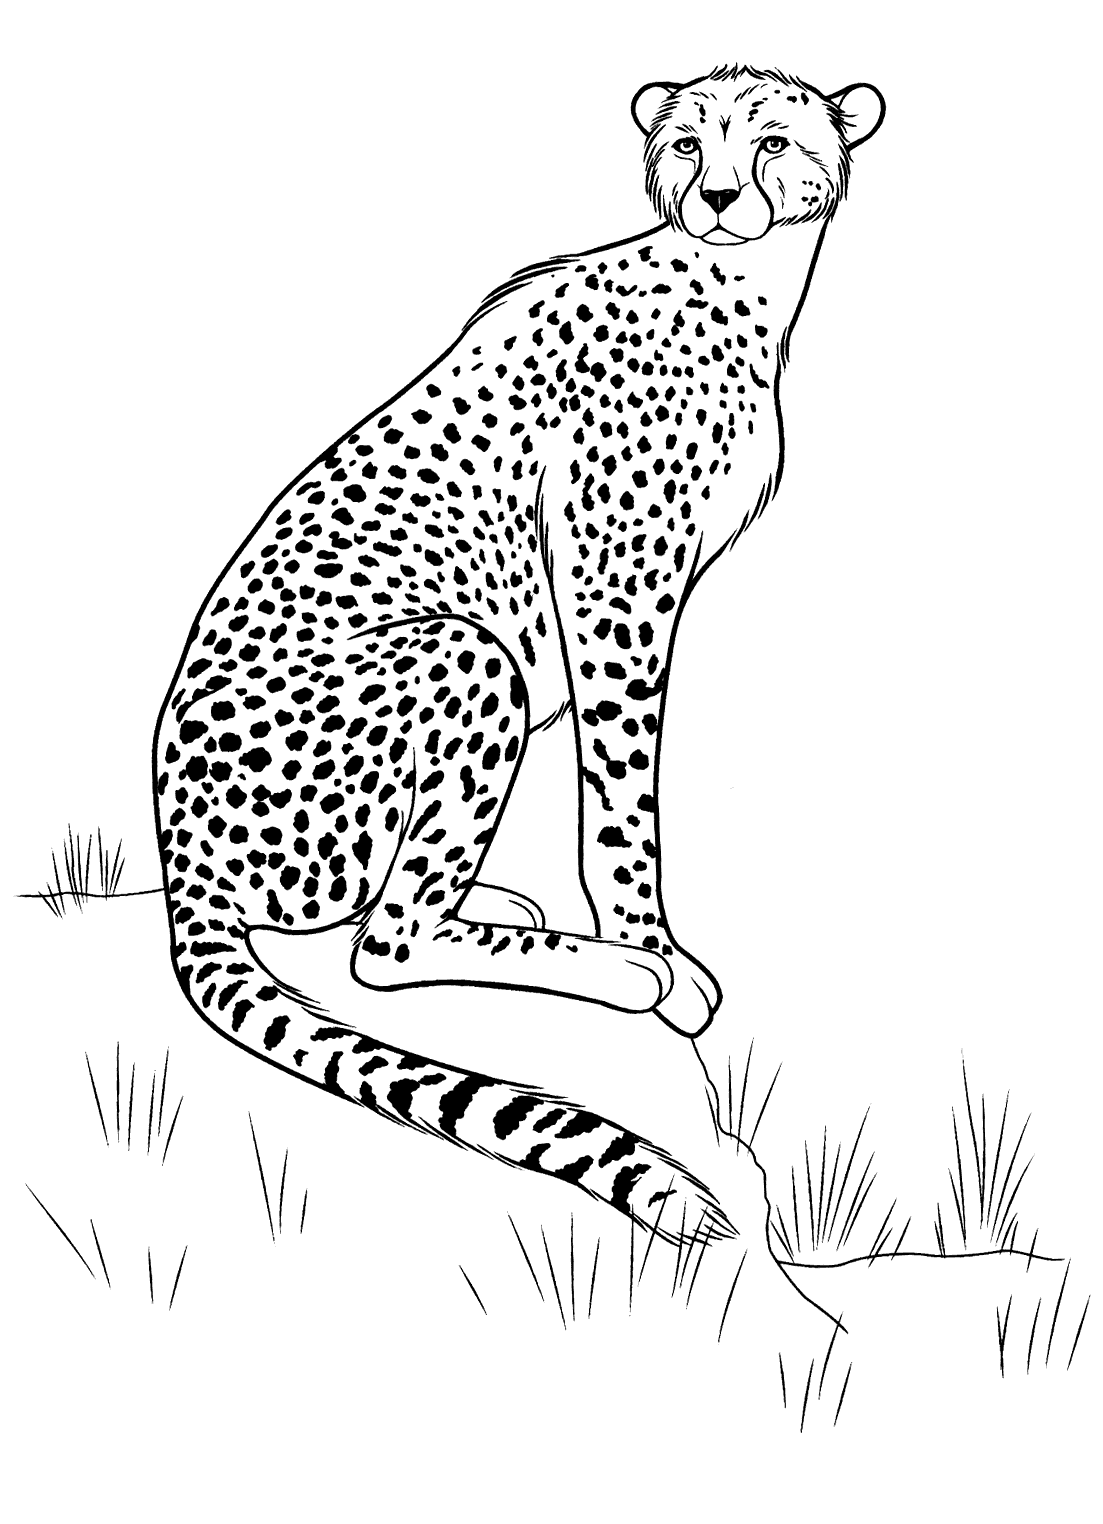 Coloring page   Cheetah on the hunt